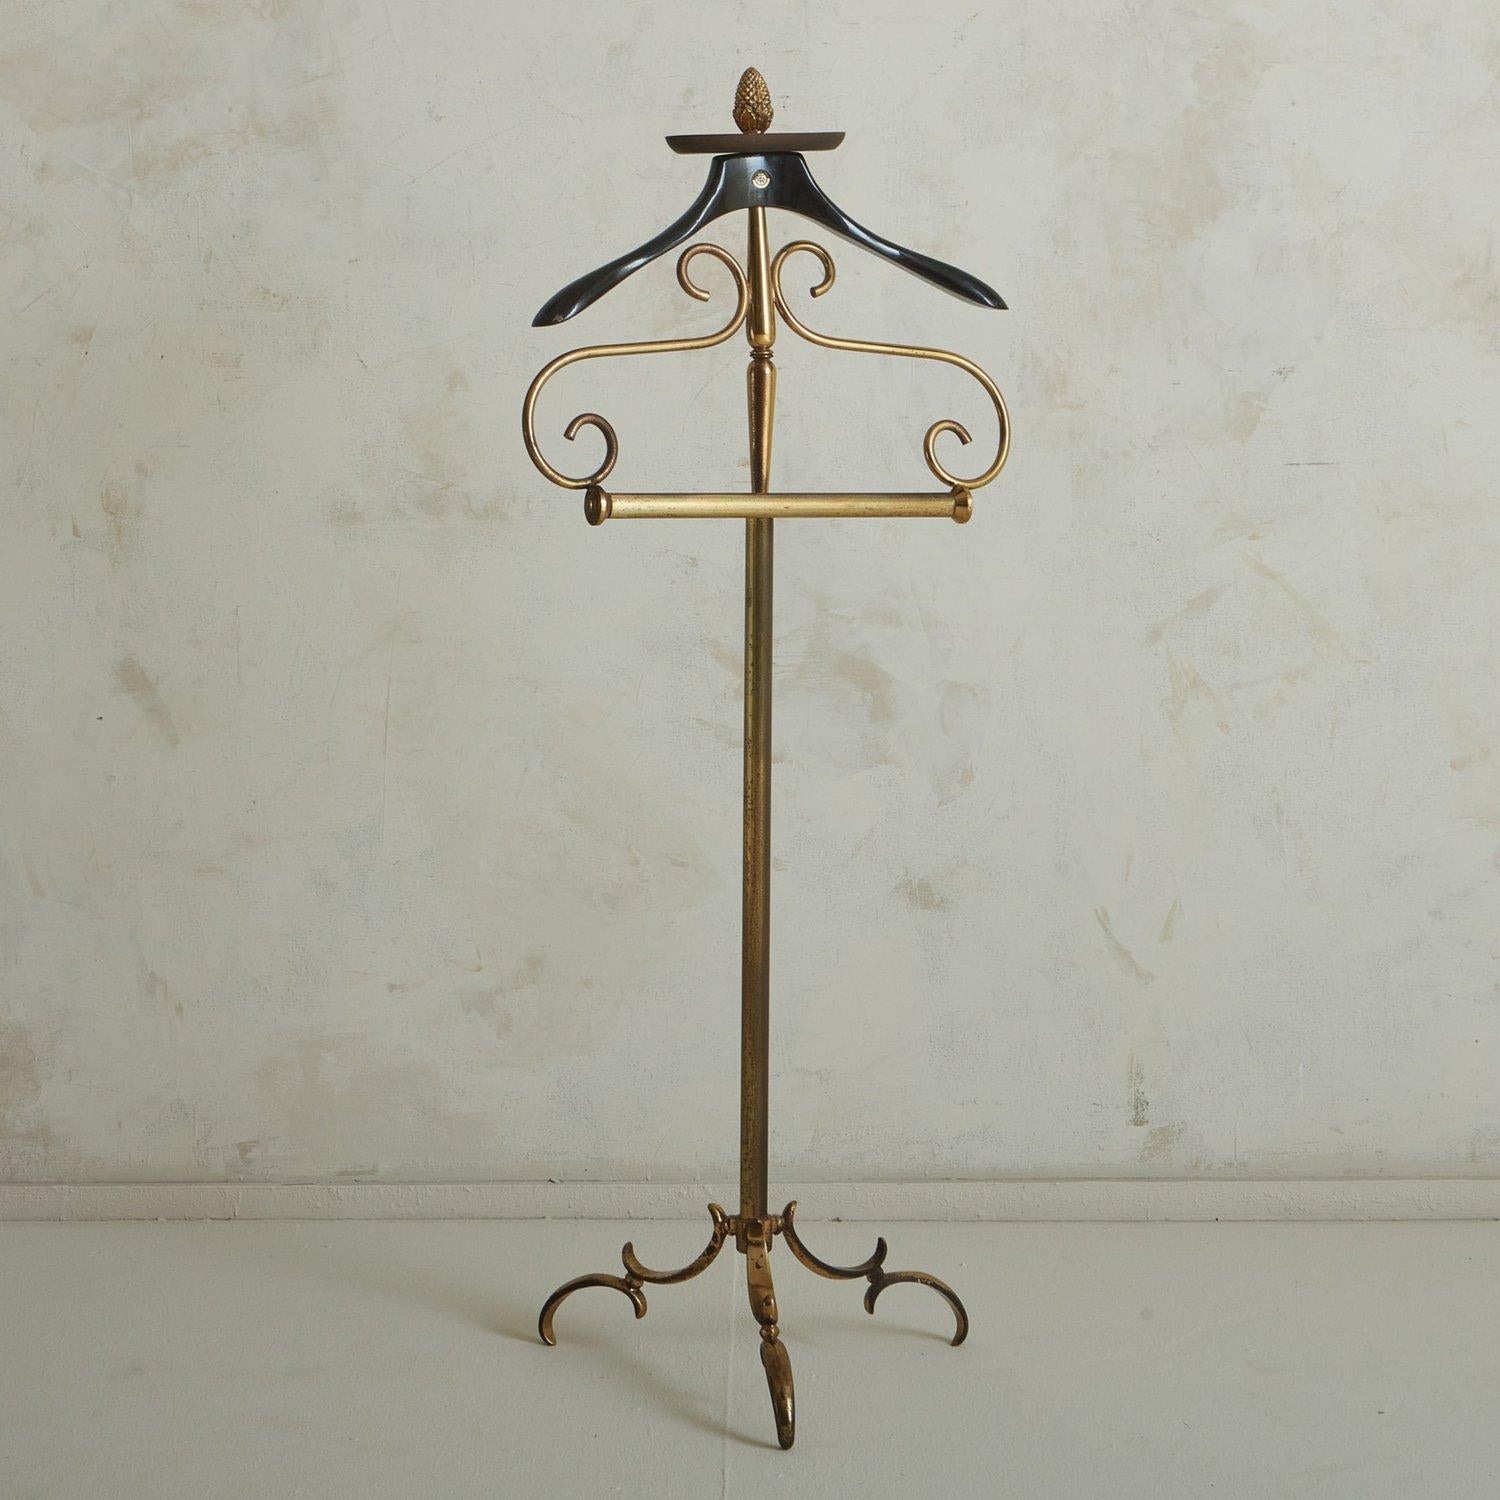 An Italian valet designed by Ico Parisi for Fratelli in the 1950s. This valet features a gilded brass frame with curled details and a tripod base. It has a black lacquered wood hanger and a catchall with a pinecone finial on the top. Retains ‘FR’